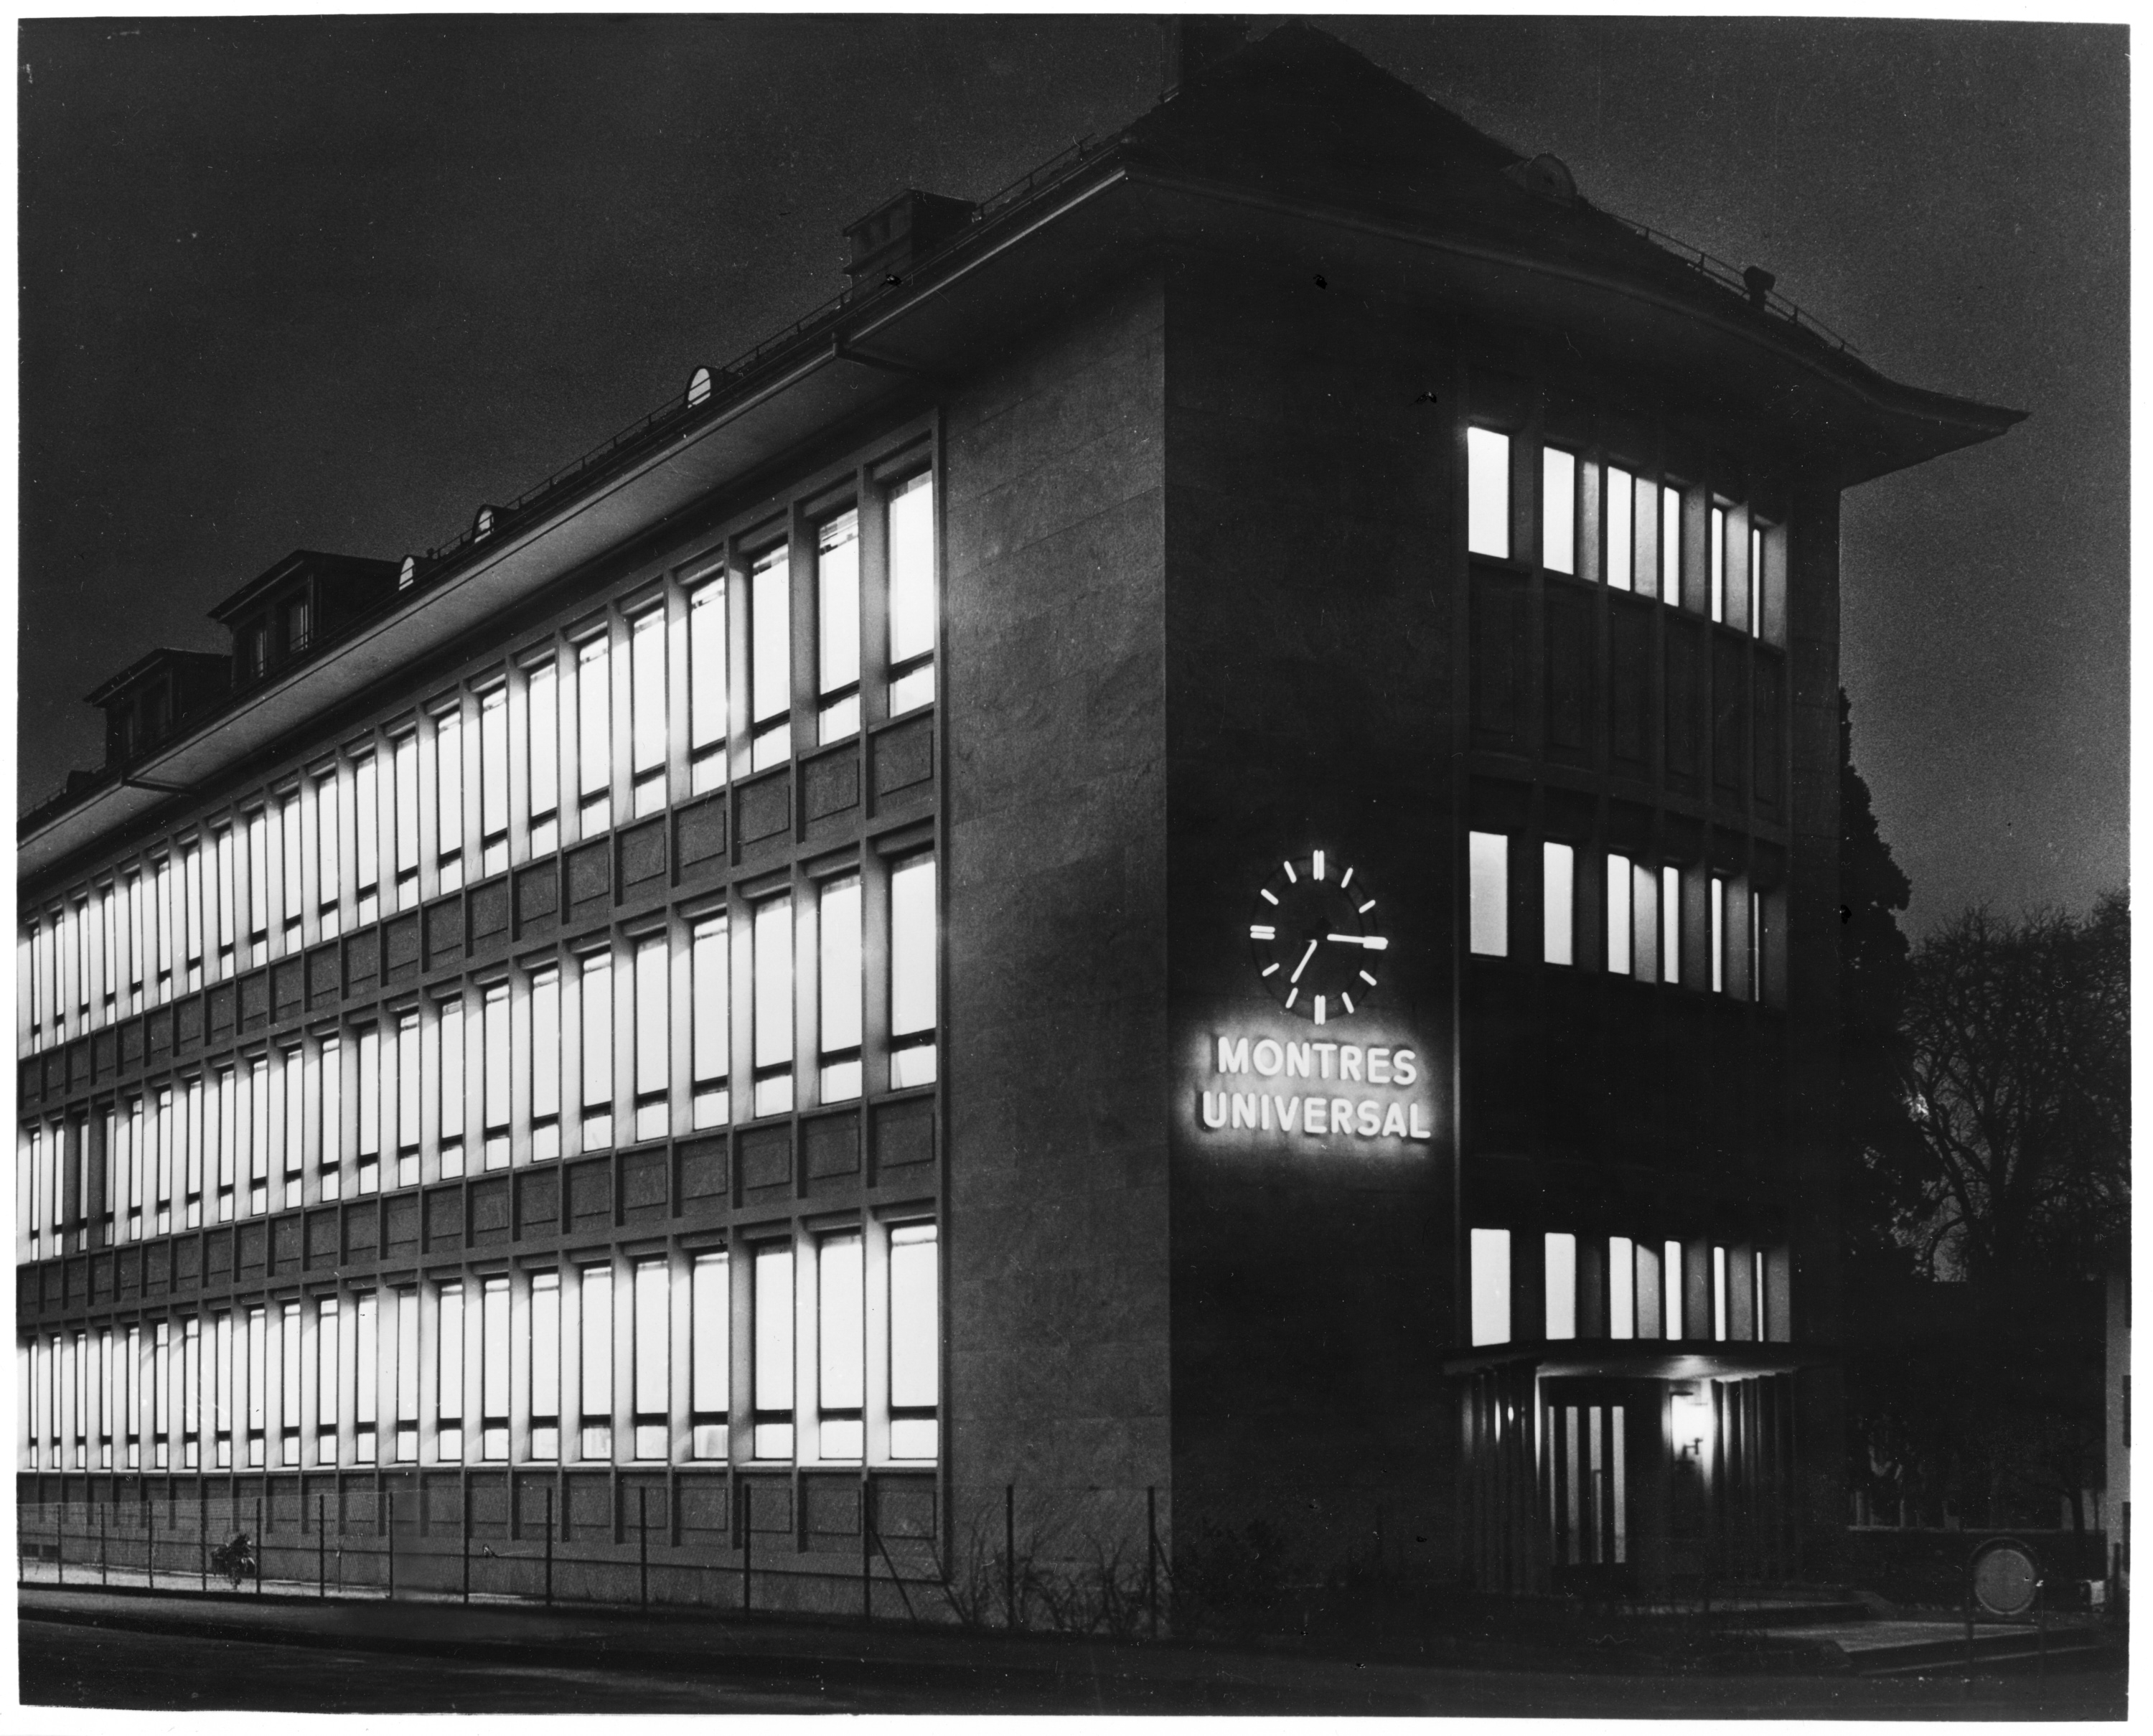 05_Universal_Geneve_the_new_factory_inaugurated_in_1956_Carouge__municipality_in_the_Canton_of_Geneva Lifestyle